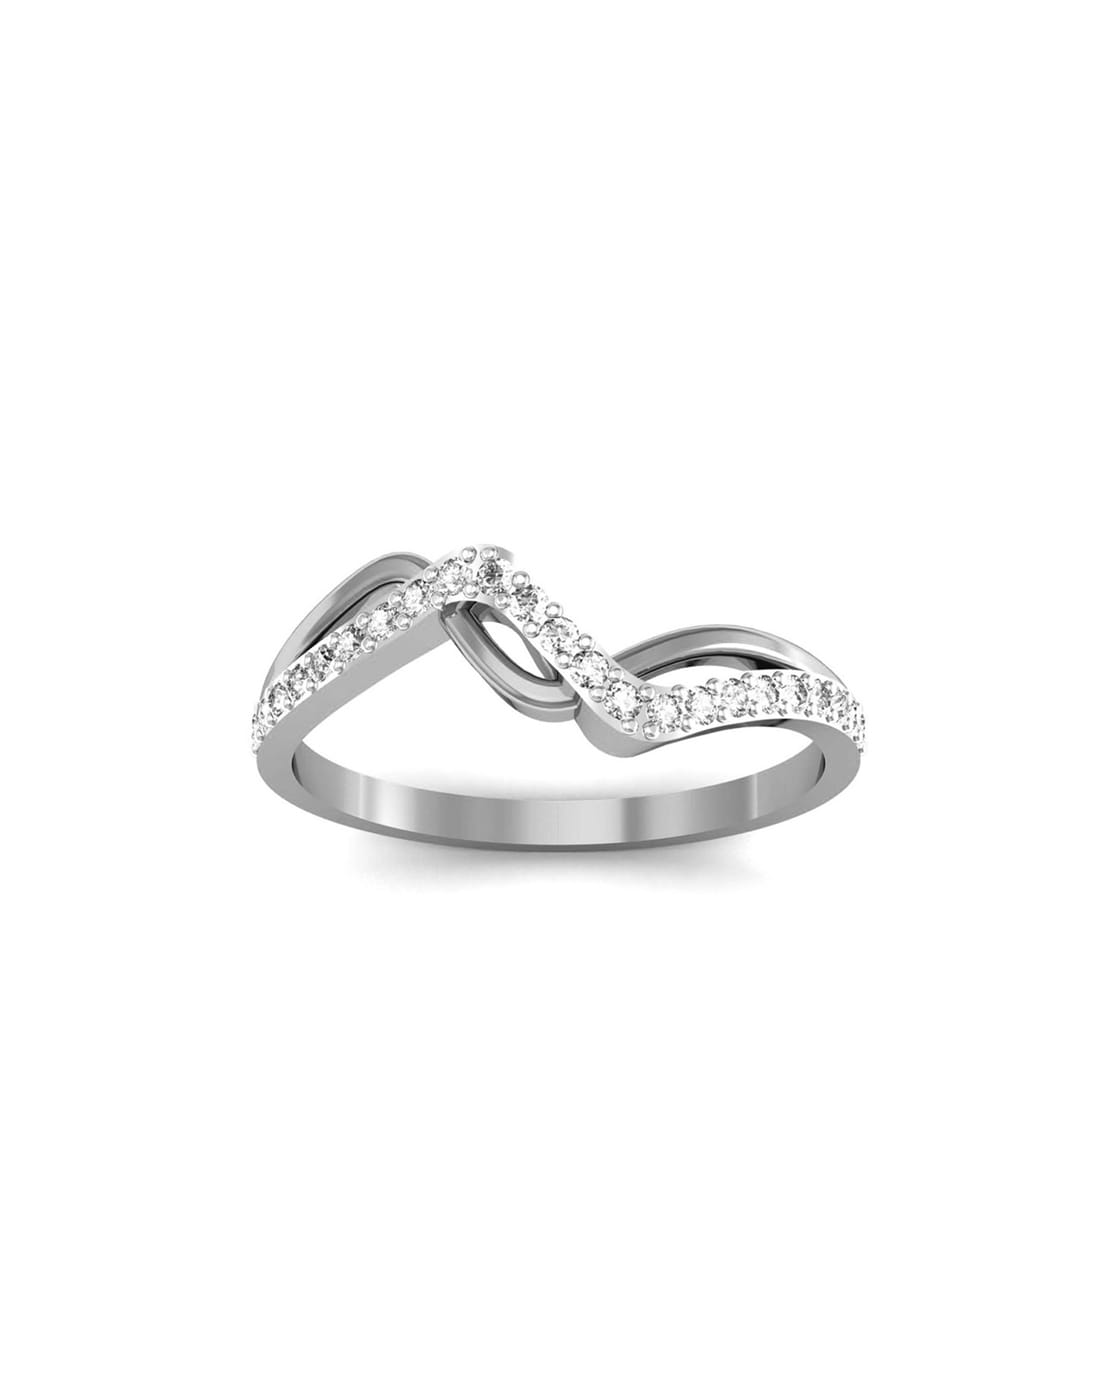 14KT White Gold Infinity Ring 0.04 CT. T.W. - Spence Diamonds